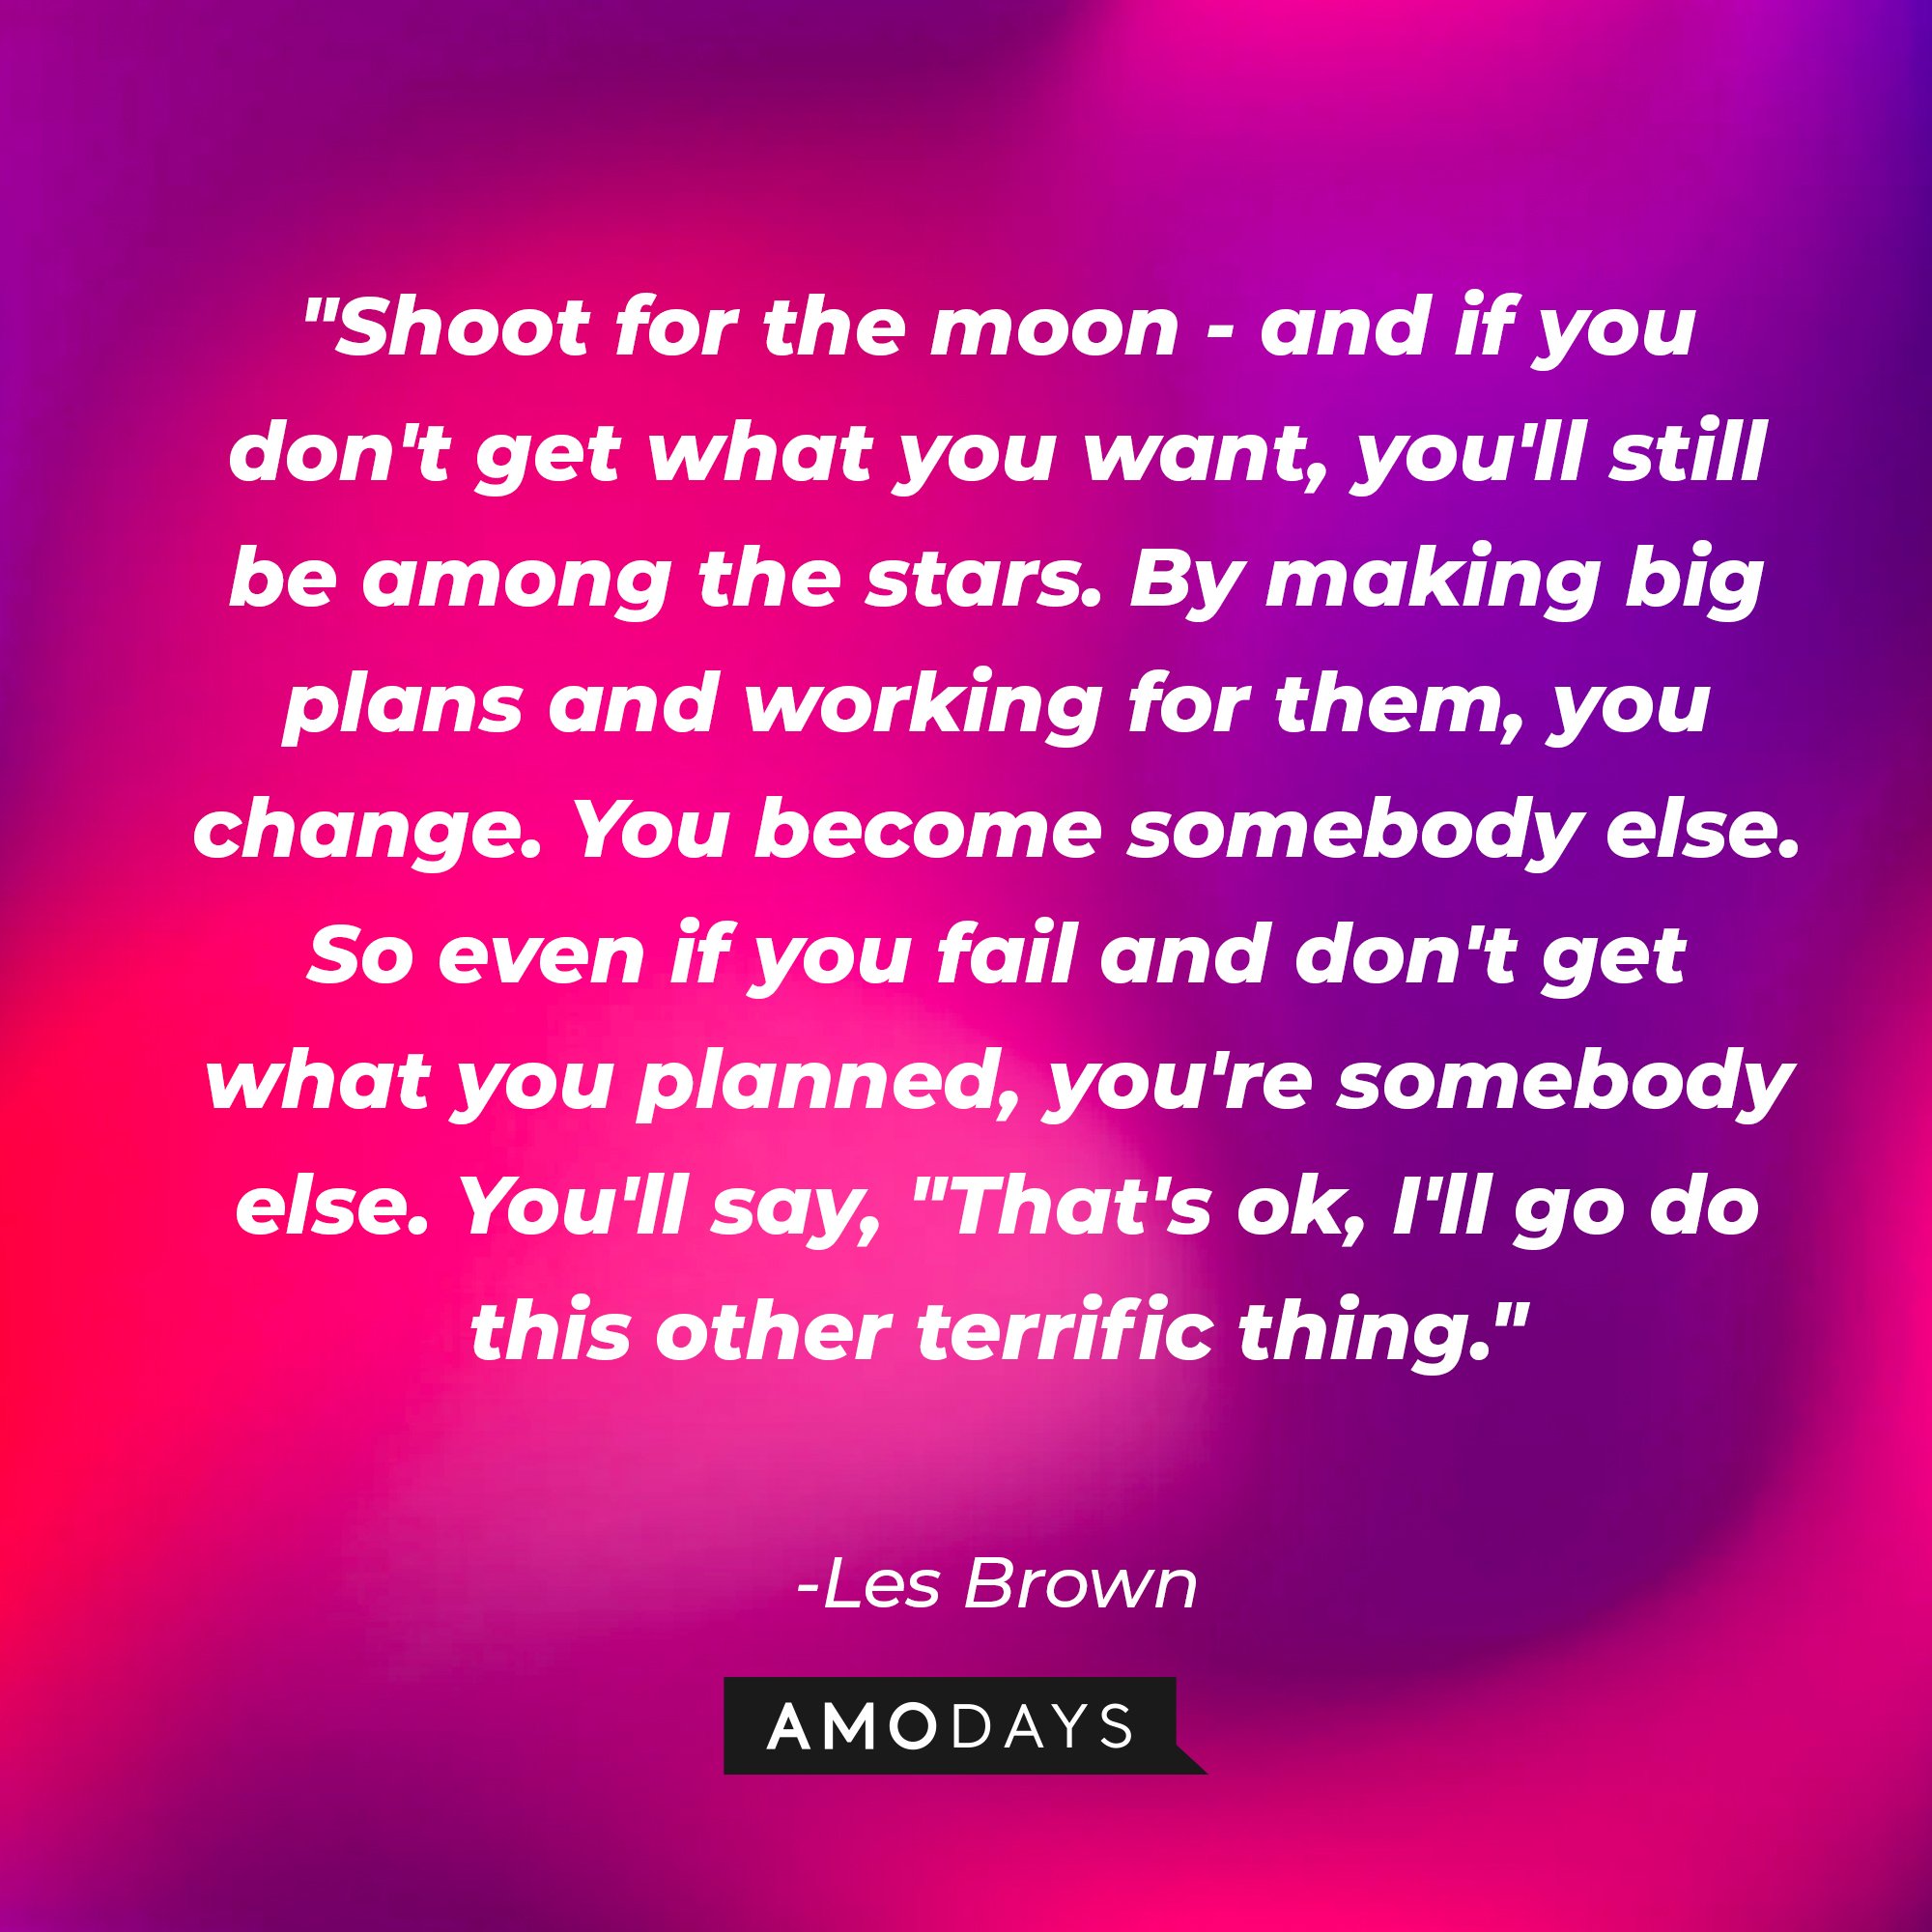 Les Brown's quote: "Shoot for the moon- and if you don't get what you want, you'll still be among the stars. By making big plans and working for them, you change. You become somebody else. So even if you fail and don't get what you planned, you're somebody else. You'll say, "That's ok, I'll go do this other terrific thing." | Image: AmoDays